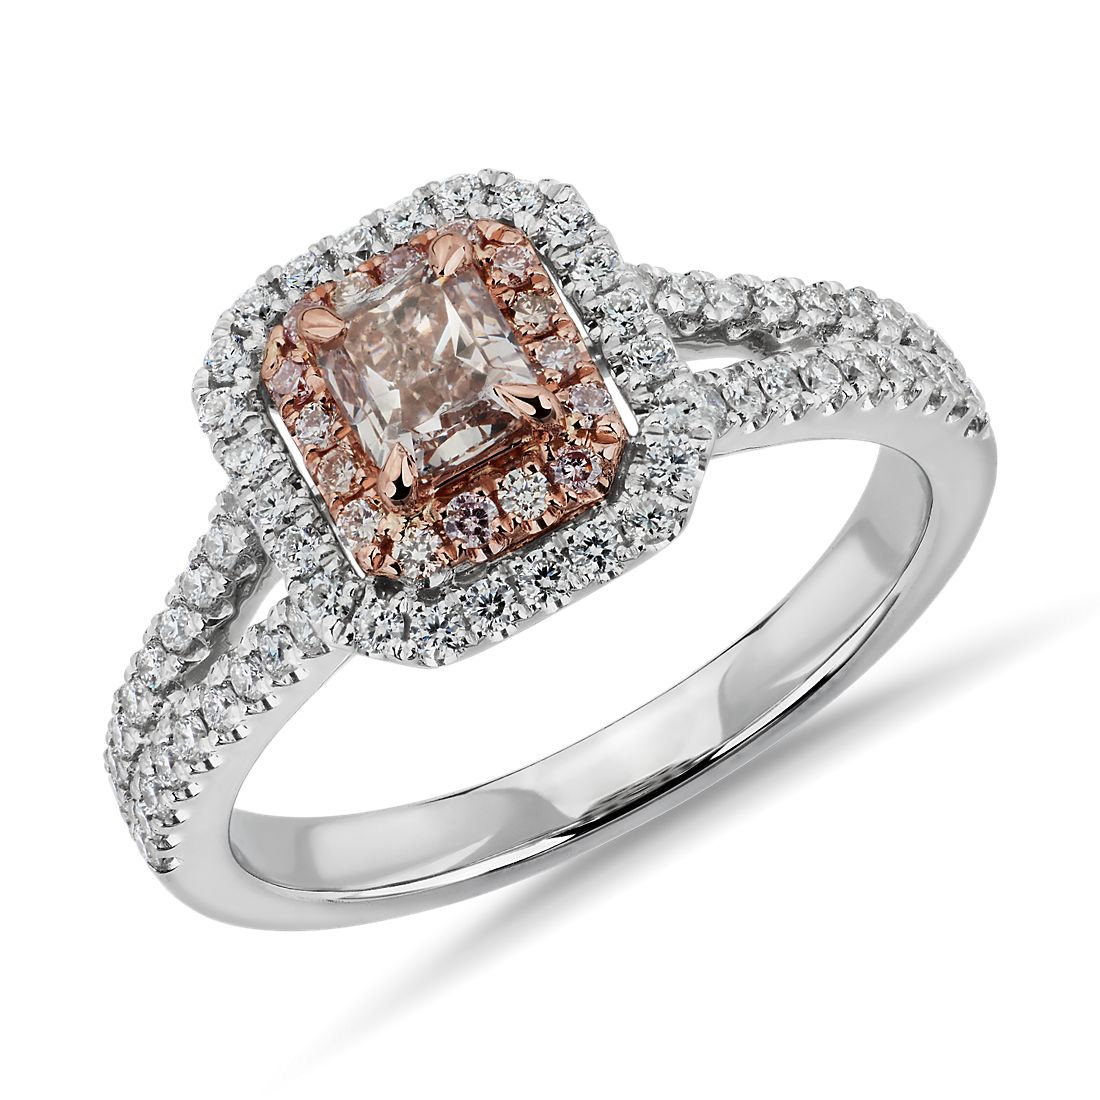 Fancy Pink Brown Cushion-Cut Diamond and Double Halo Diamond Ring in Platinum and 18k Rose Gold (0.83 ct. tw.)